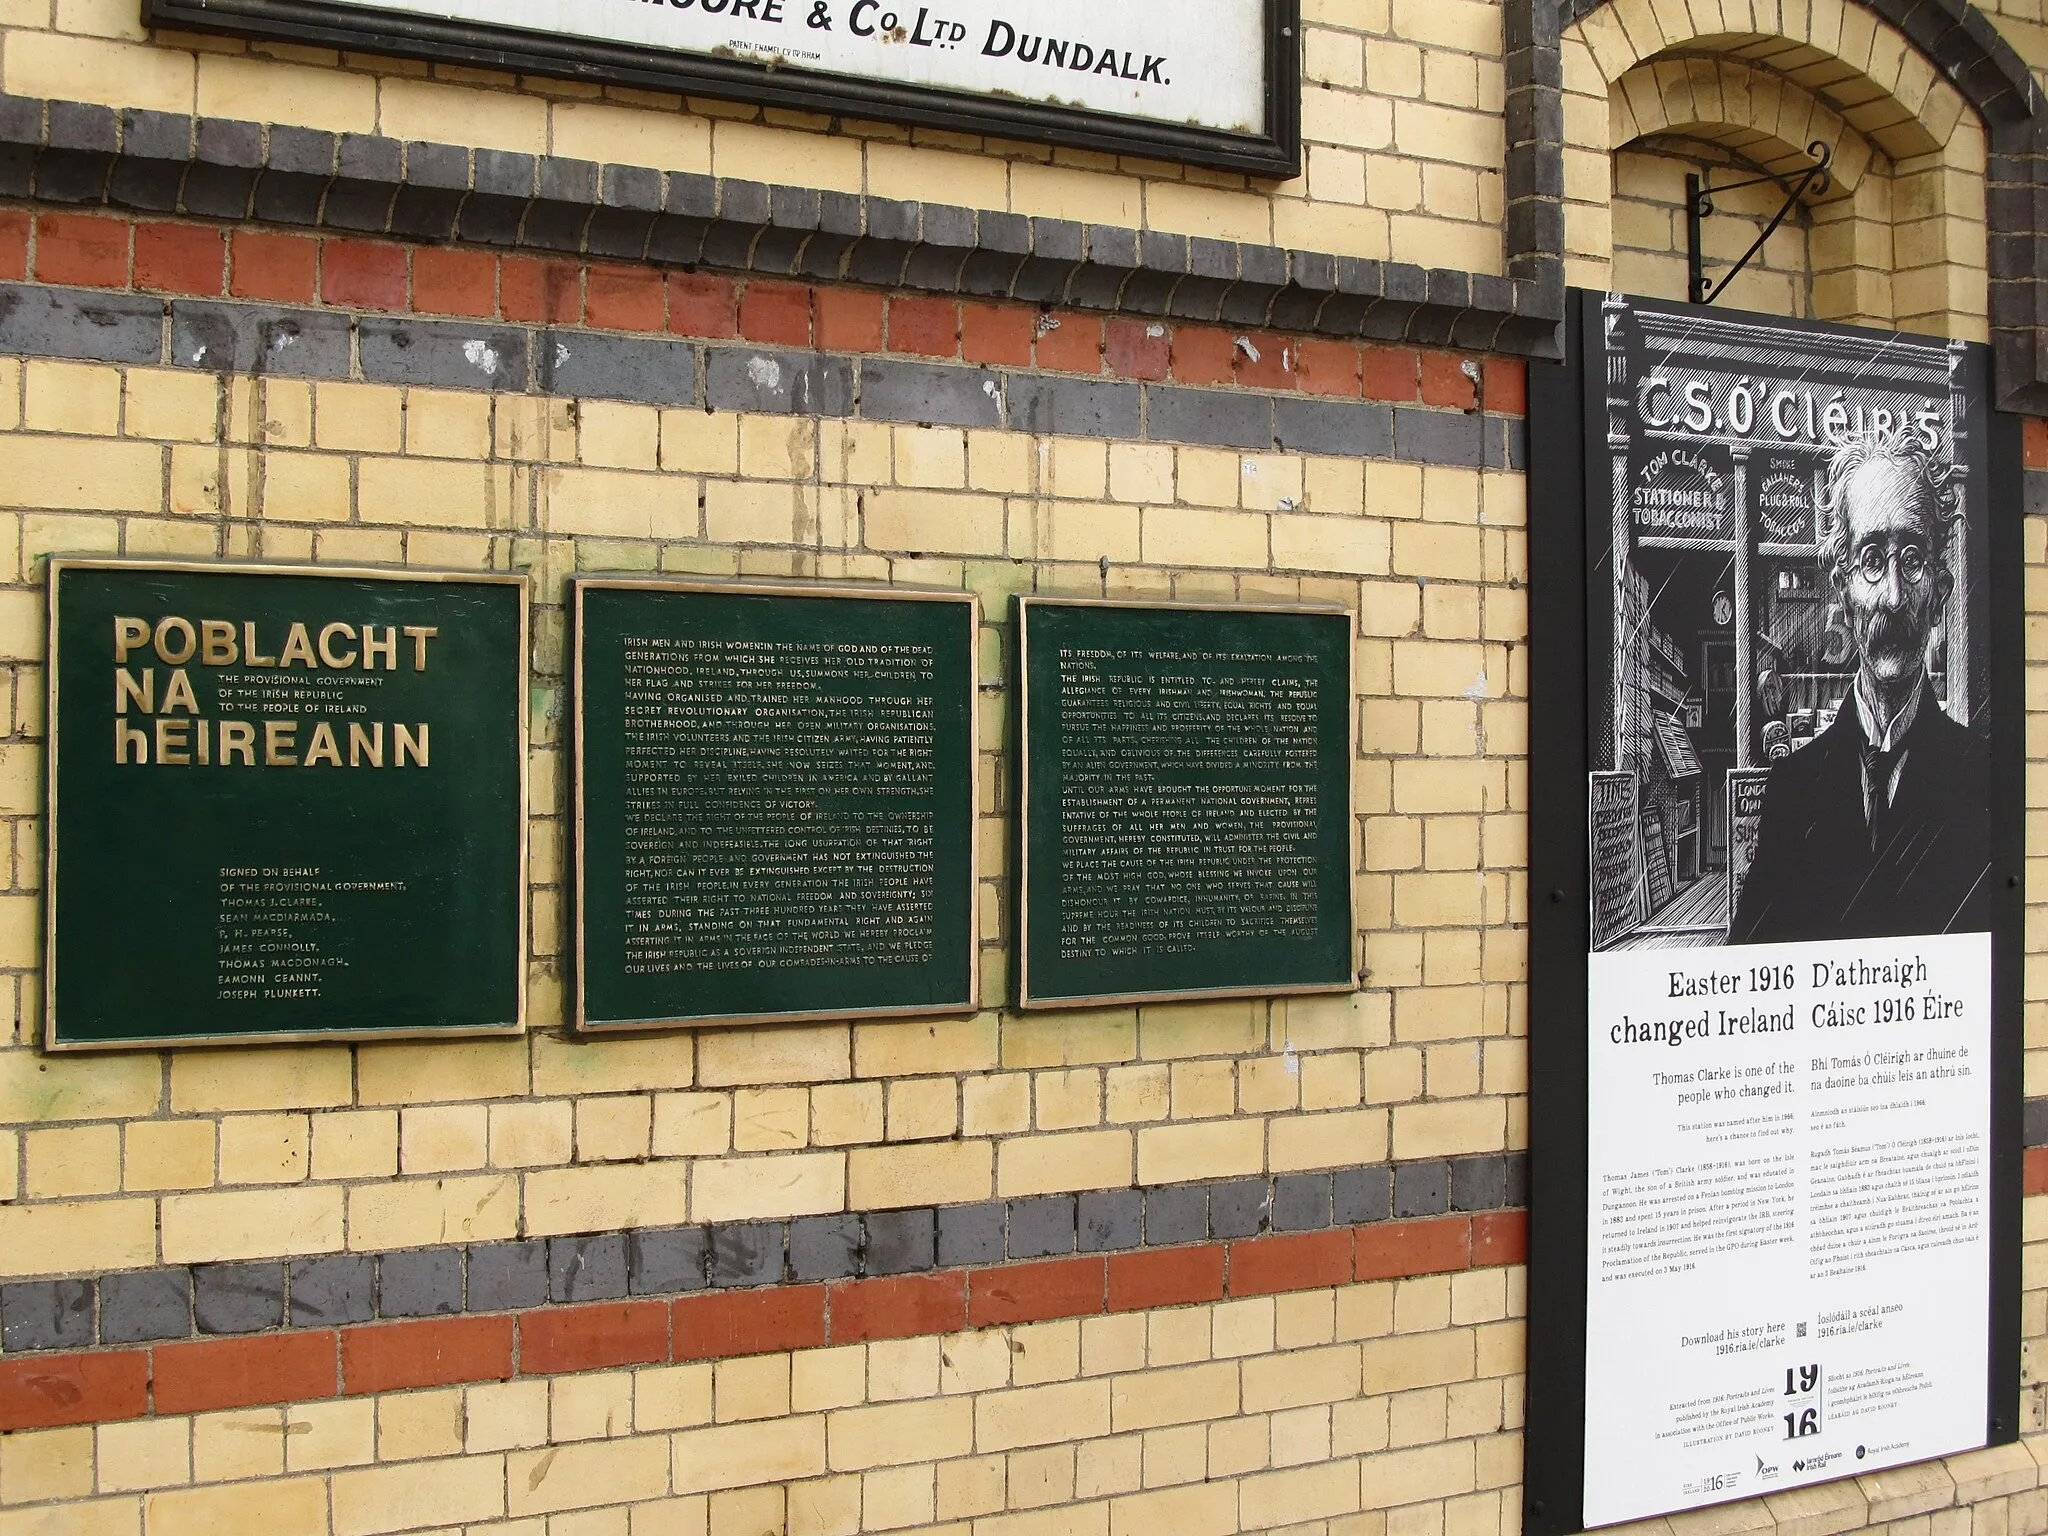 Photo showing: Memorials to the Easter Rising Patriot Tom Clarke at Clarke Station